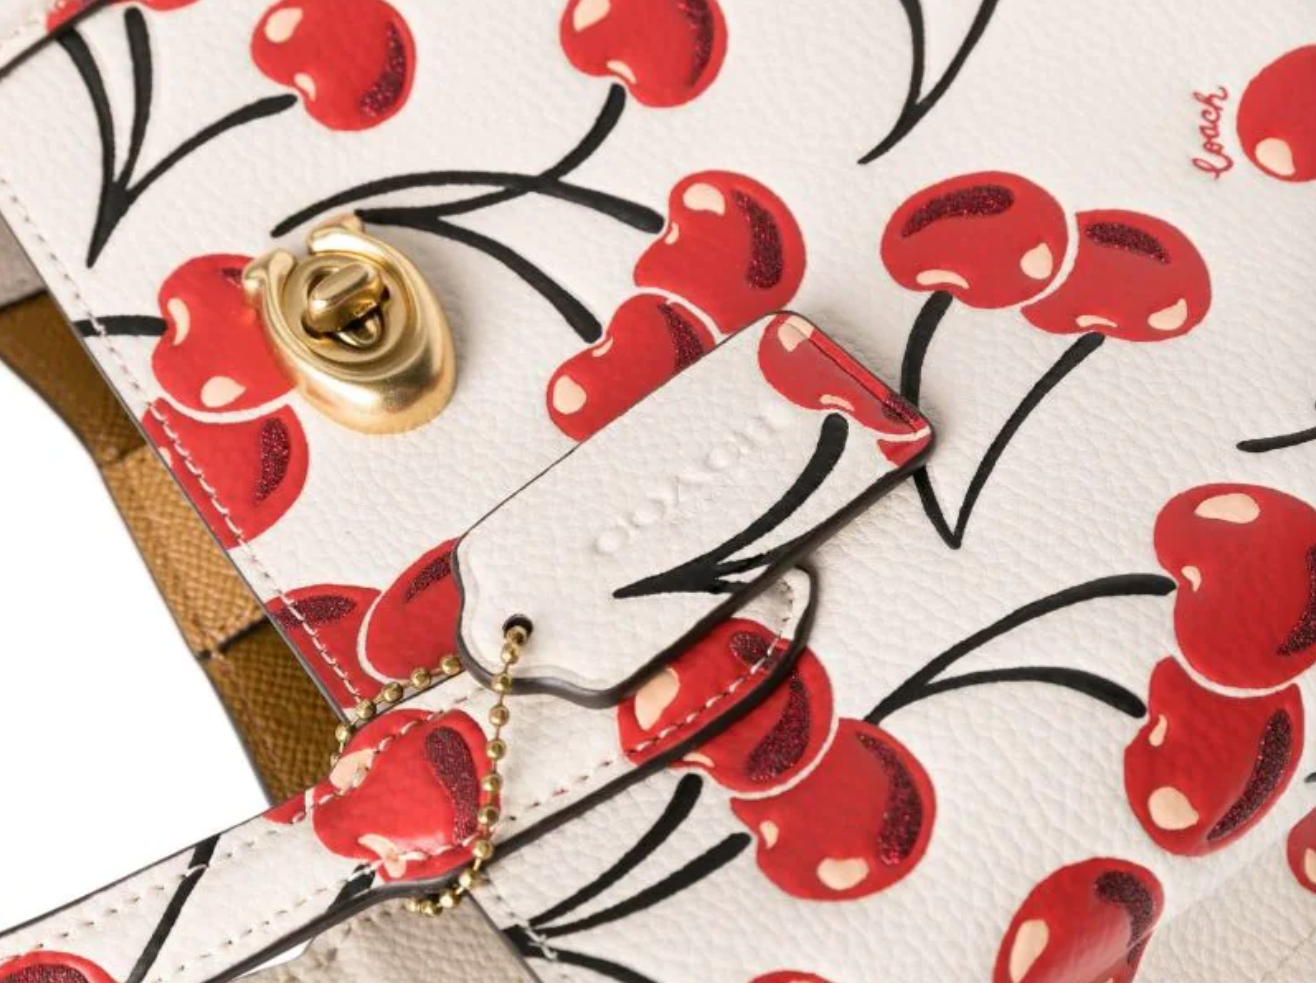 Coach Outlet's Clearance Heart Cherry Handbags Are Perfect for Spring